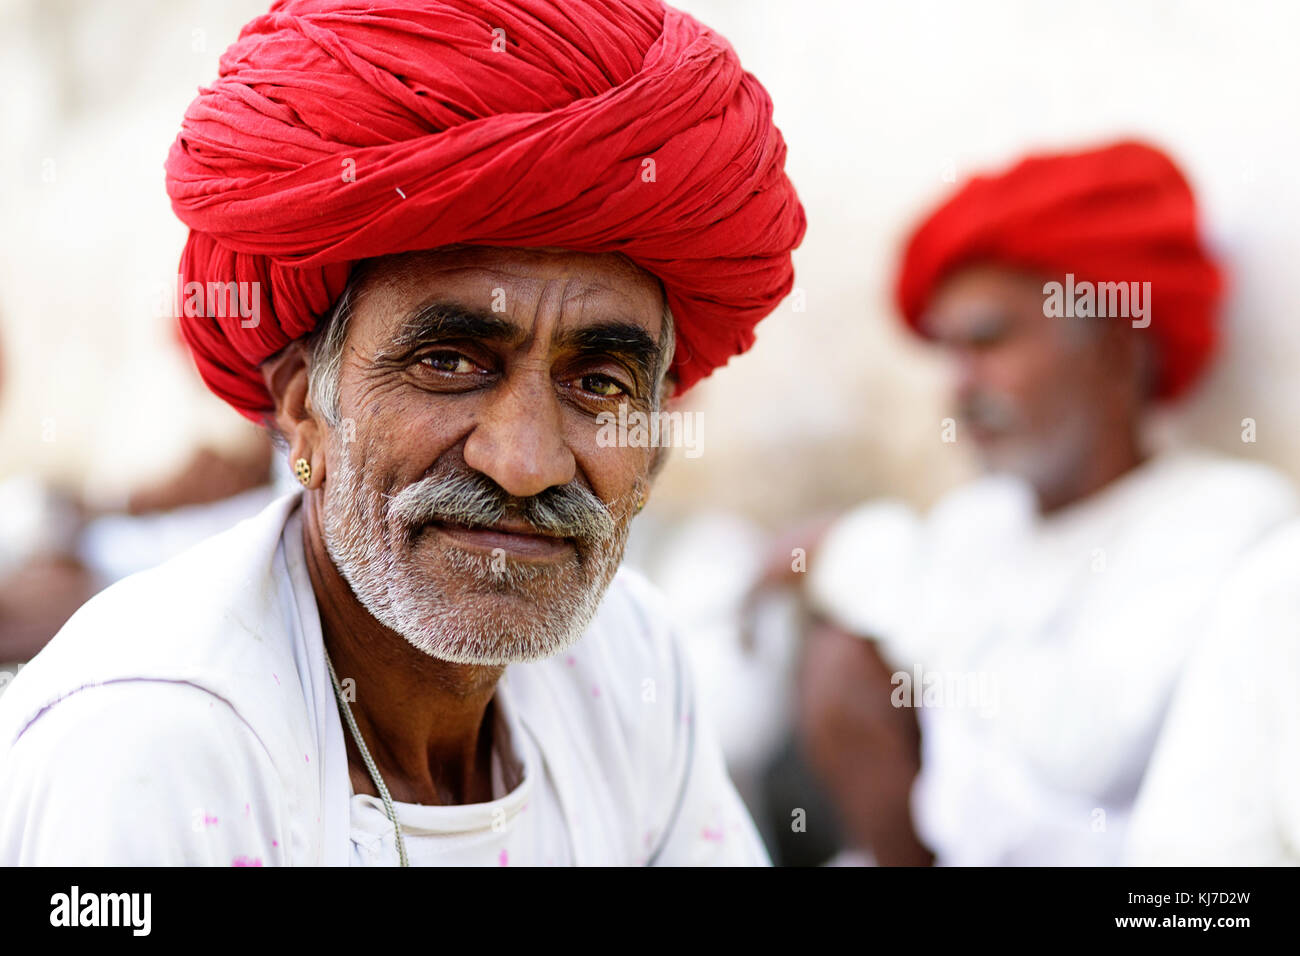 Portrait of an elder man from Rabari tribe with red turban and his friends in the back, Rjasthan, India. Stock Photo